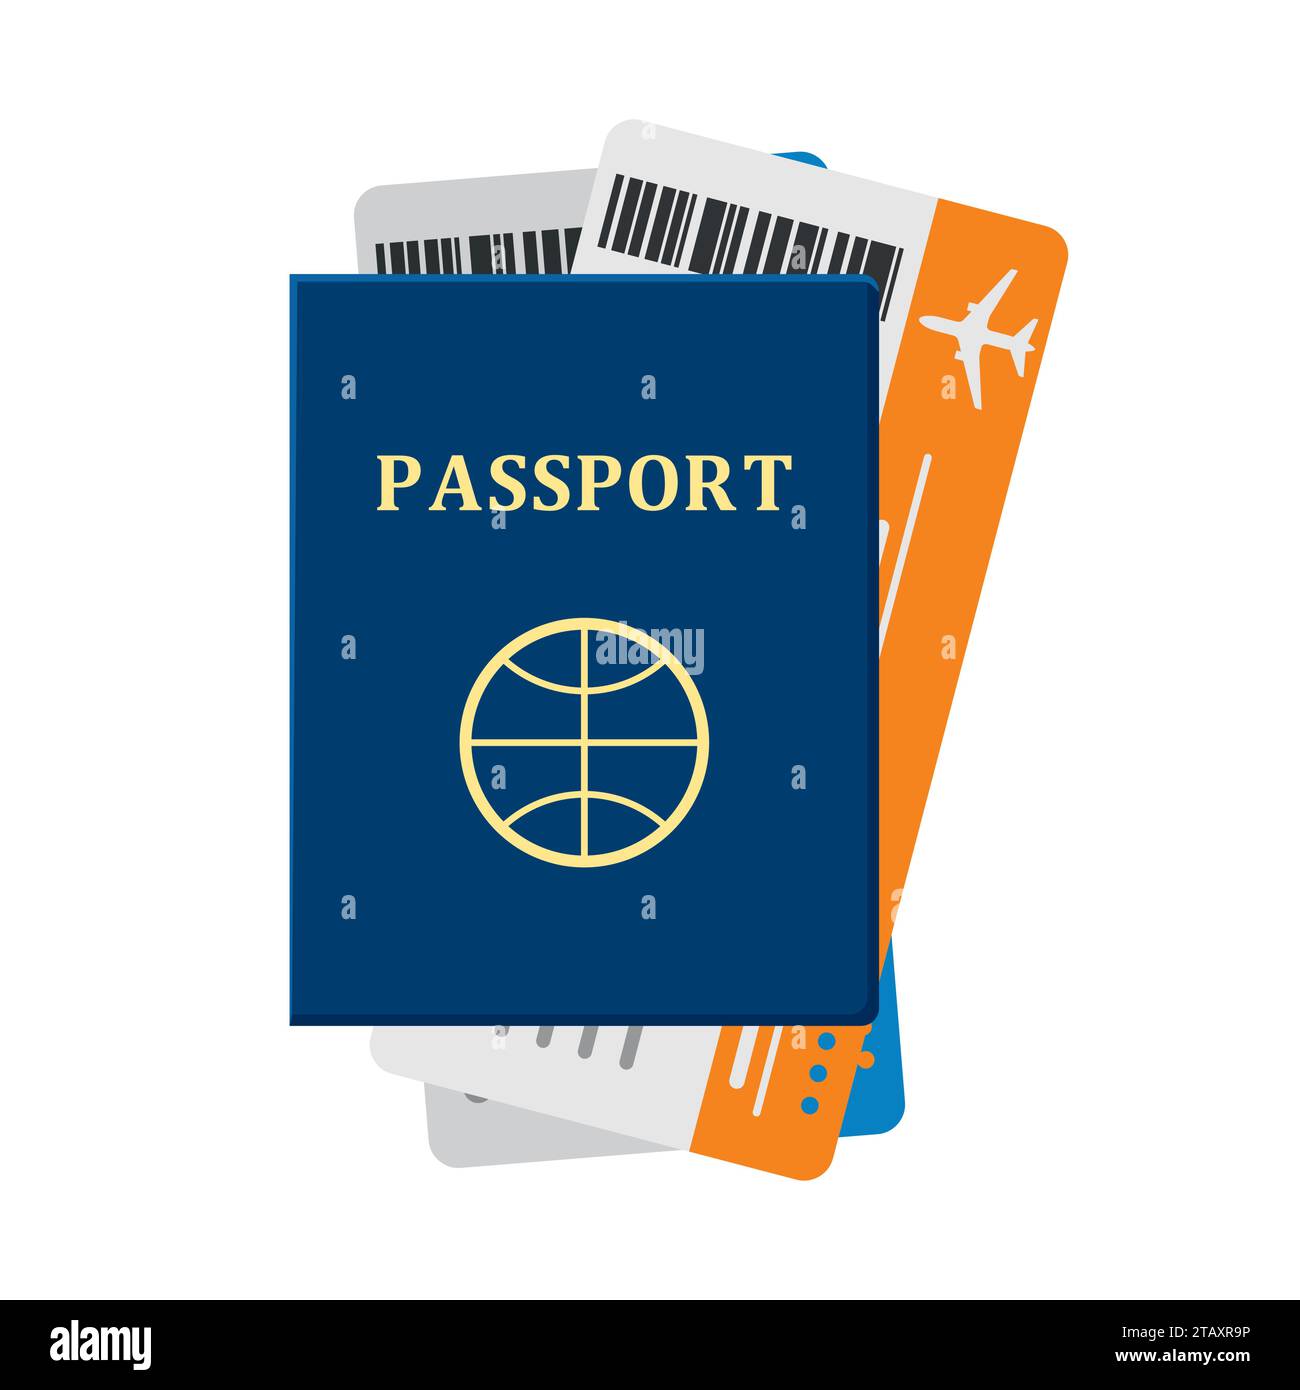 Passport with tickets isolated on white background. Passport and tickets travel, tourism business vacation, trip pass tourist flight symbol. Holiday p Stock Vector